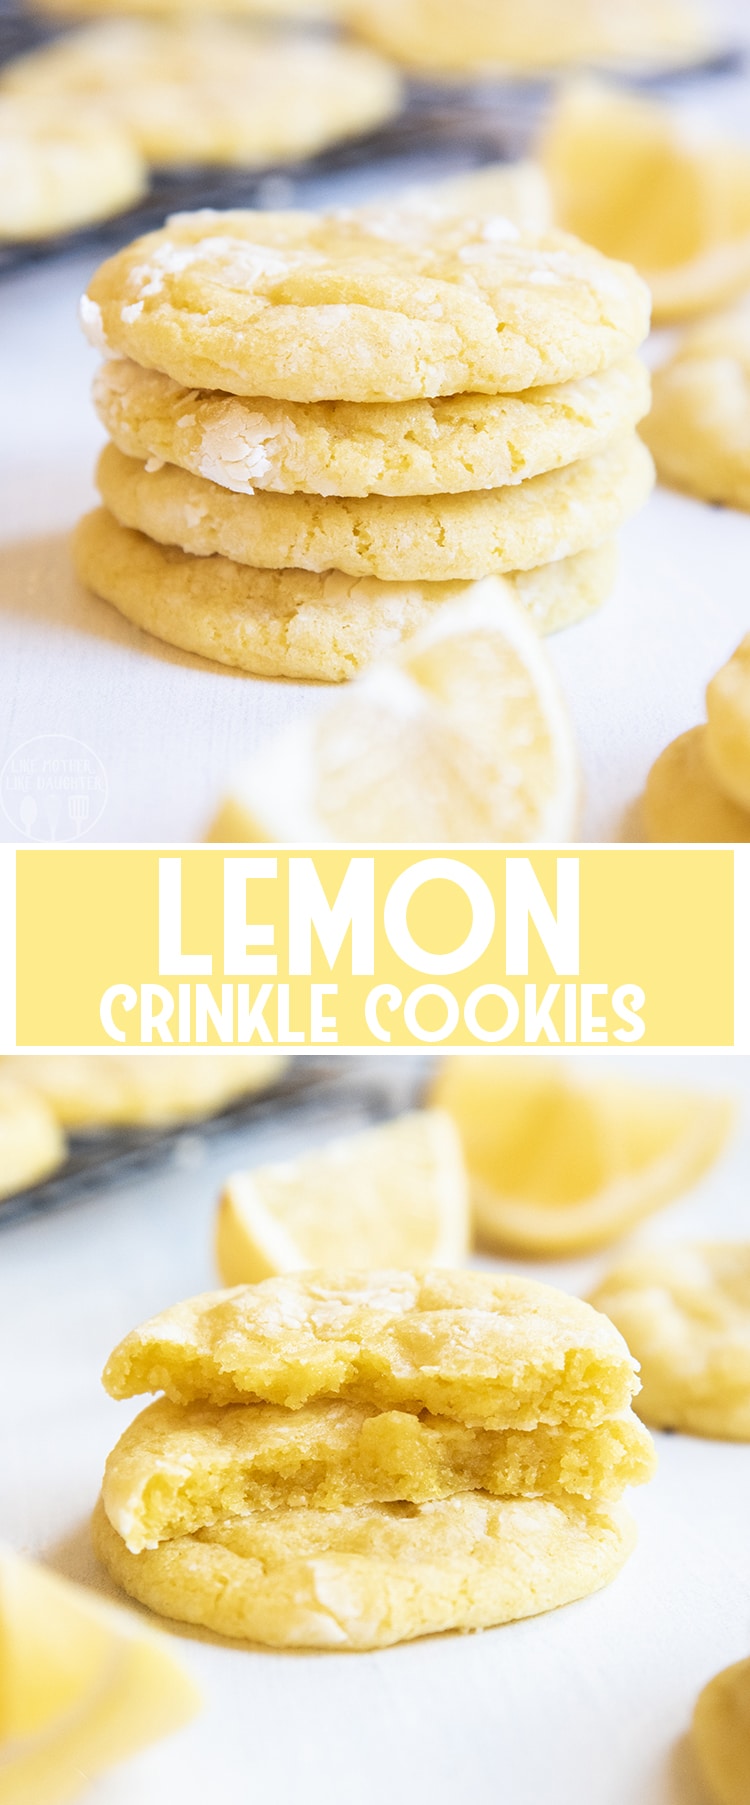 These lemon crinkle cookies are soft and chewy cookies, with the perfect tangy and sweet lemon flavor in every single bite!